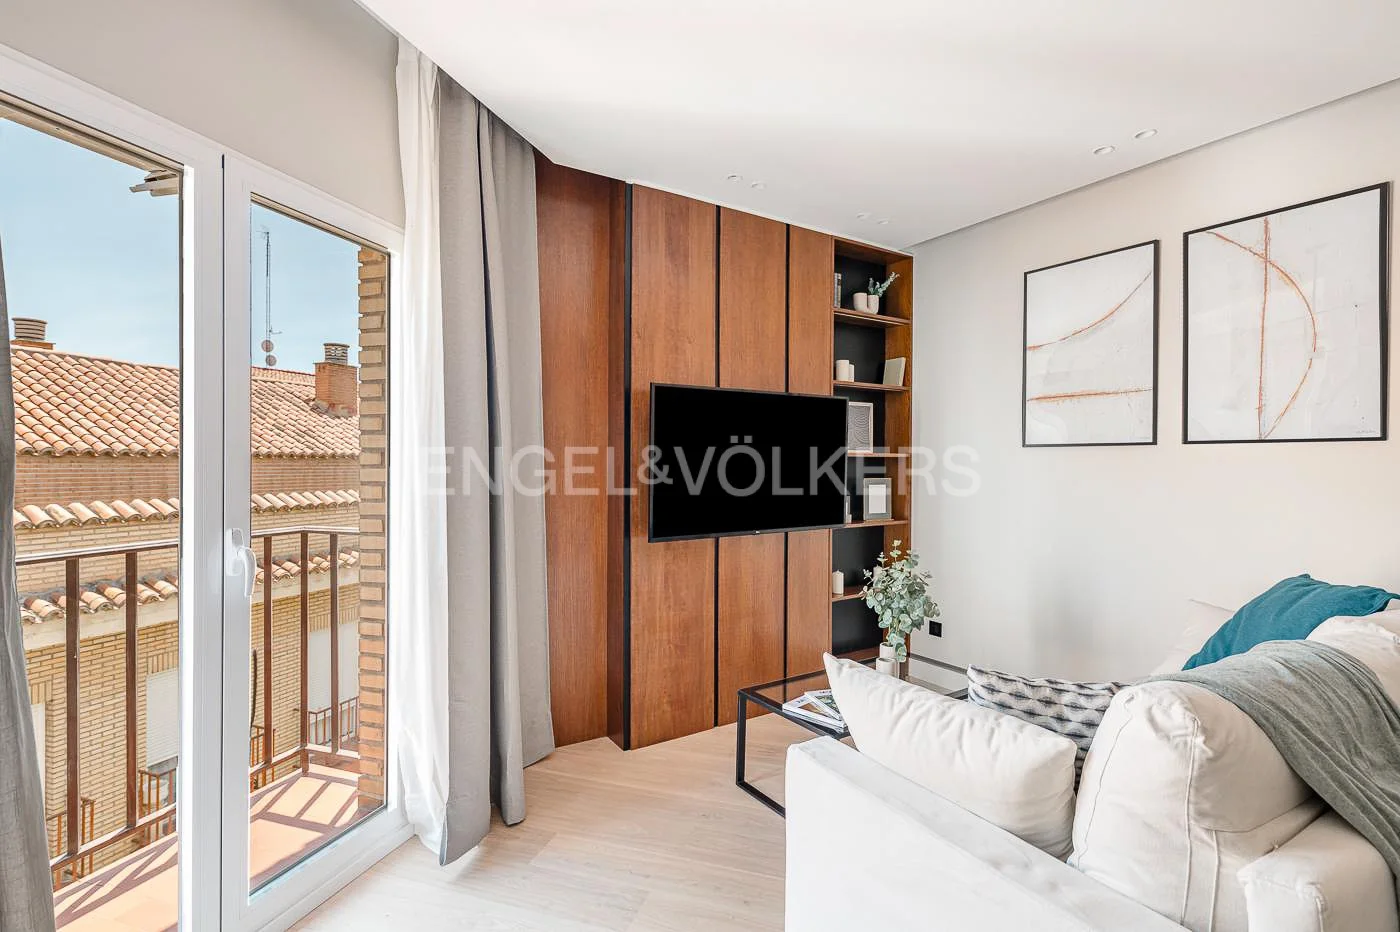 Bright refurbished flat in Cortes District